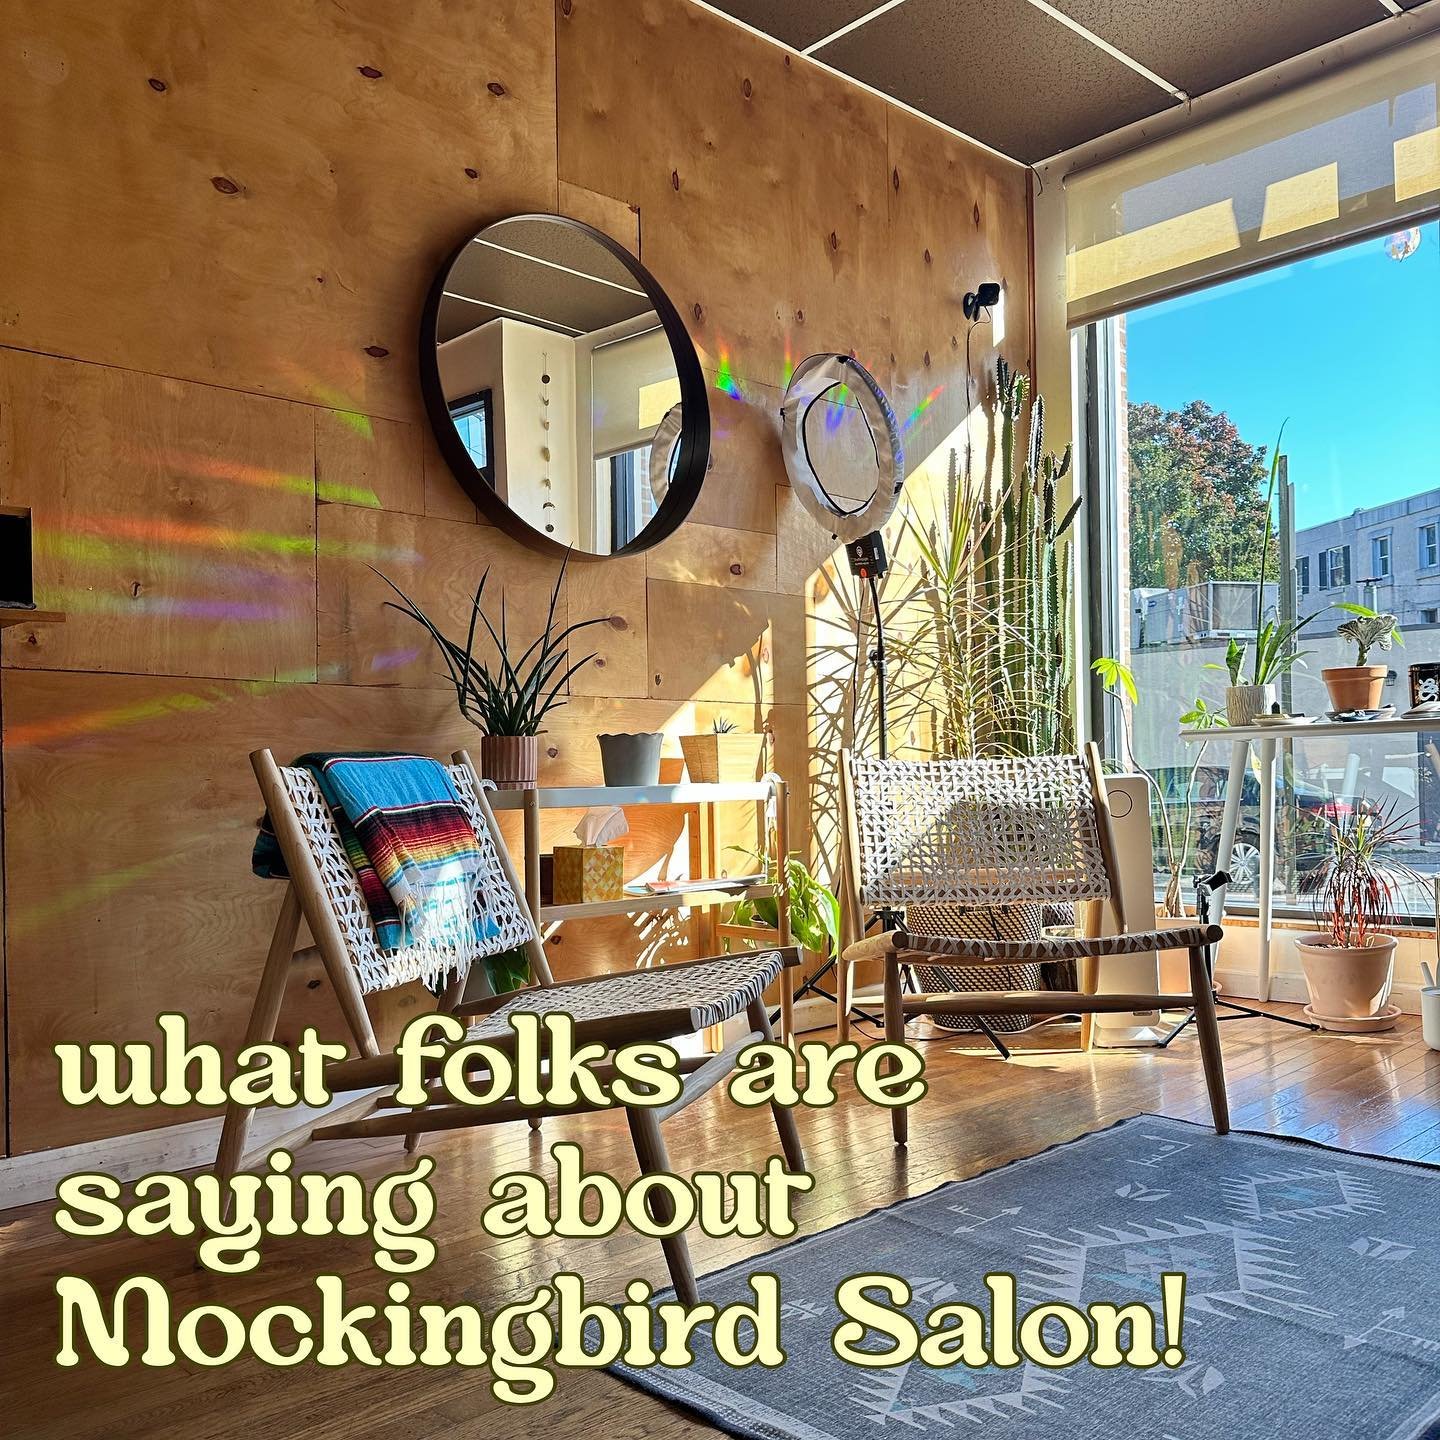 some reviews taken from our Yelp and Google pages! an easy (and free 😉) way to give back to your stylist is writing a review and rating your experience! if you love Mockingbird, let us know! 🐦 💛
-
-
-

#phillyhairsalon #phillyhairstylist #cleanhai